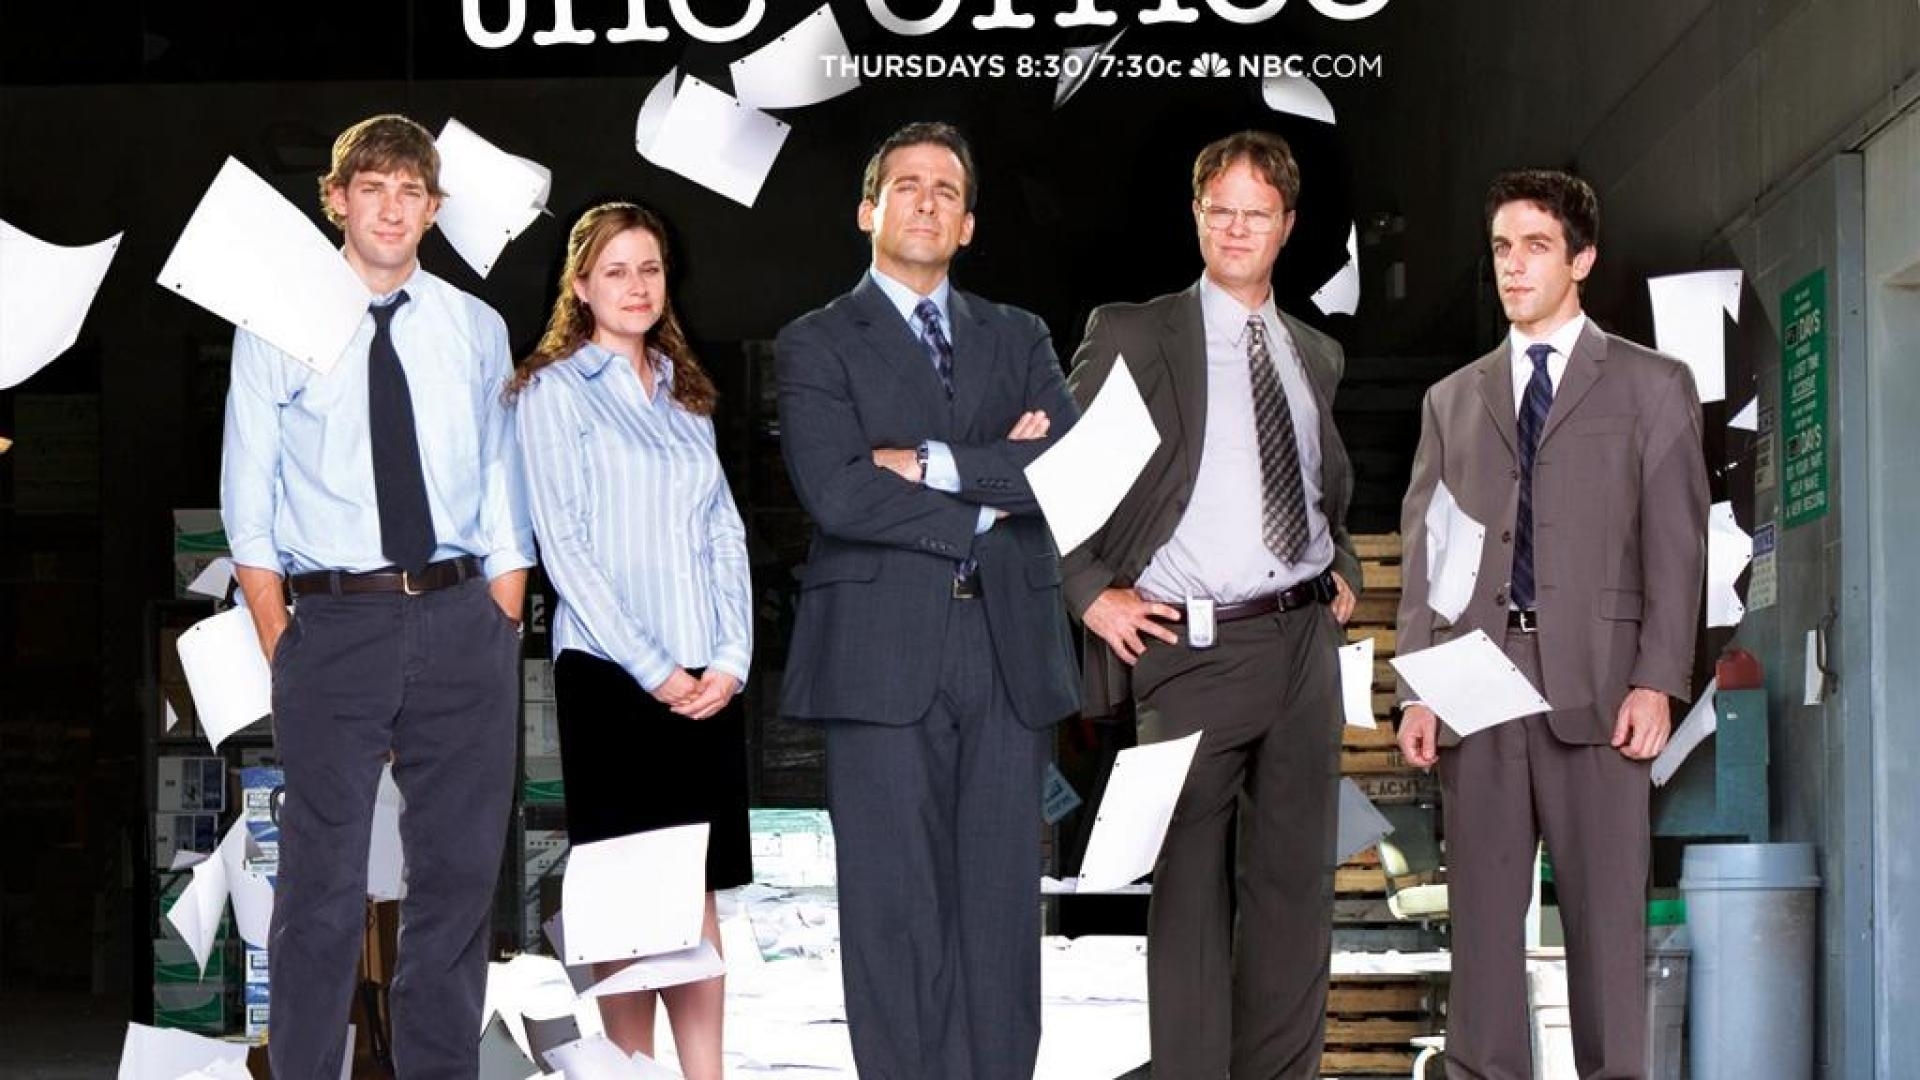 10 Best The Office Wallpaper 1080P FULL HD 1080p For PC ...